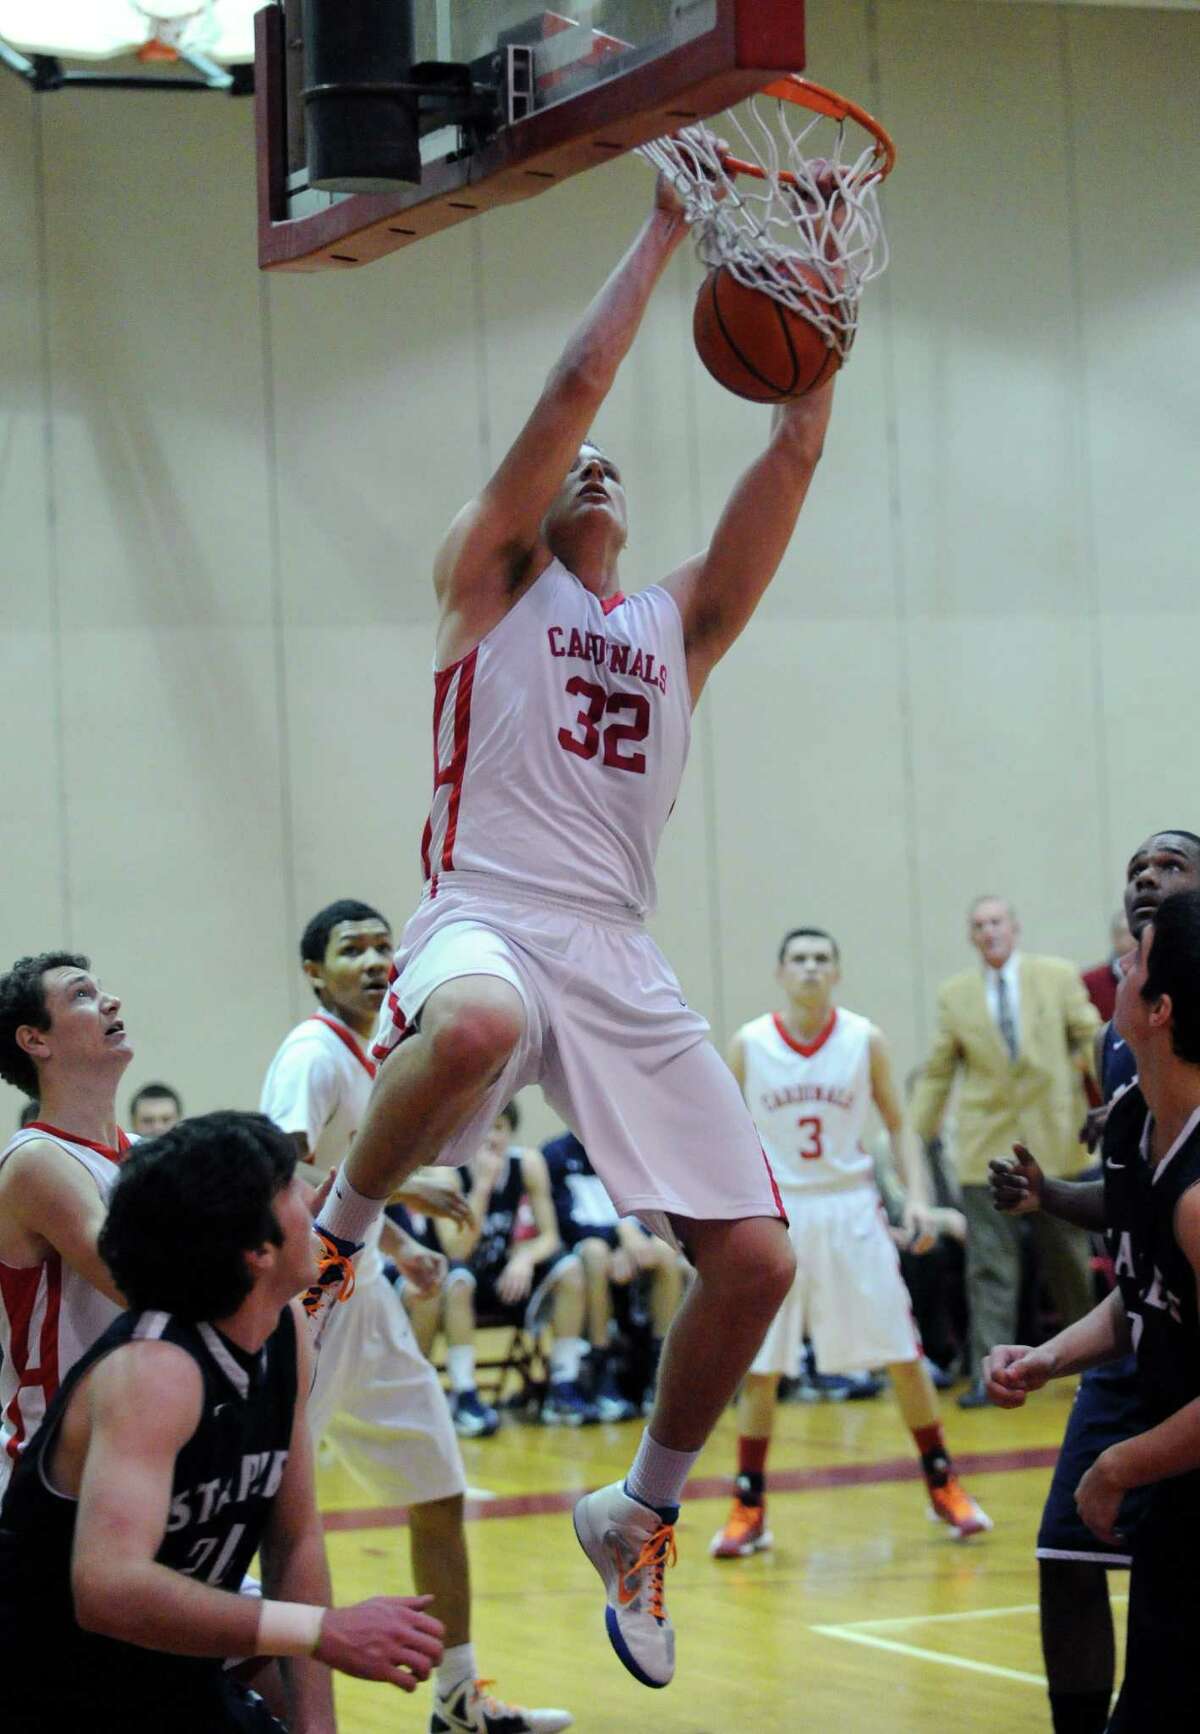 Alex Wolf # 32 of Greenwich dunks the ball during the boys high school basketball game between Greenwich High School and Staples High School at Greenwich, Tuesday, Feb. 12, 2013.